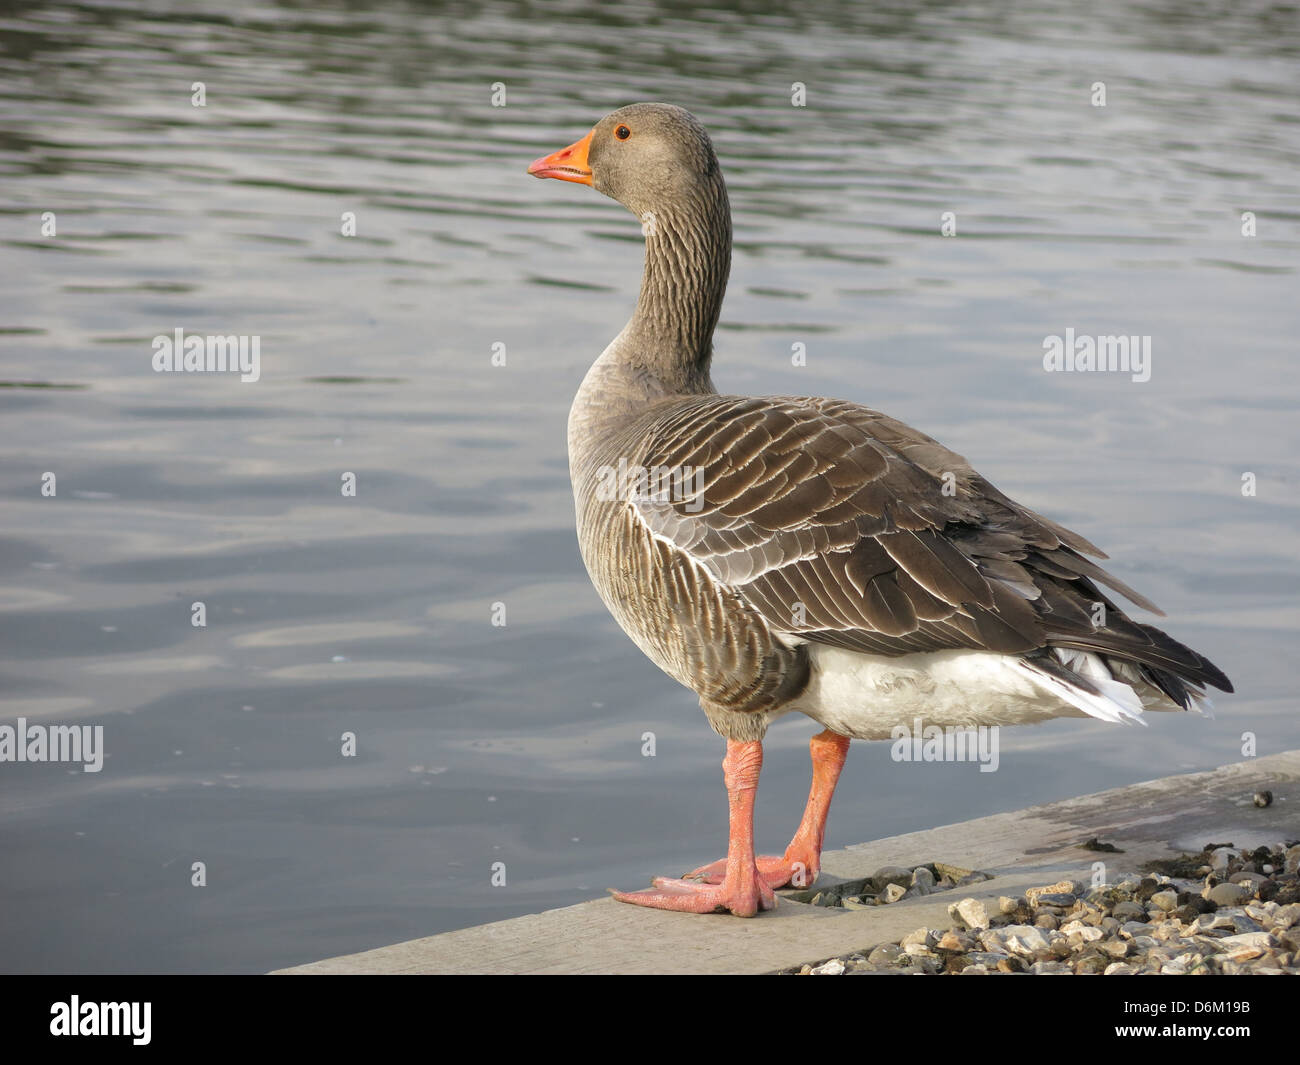 Greylag Goose by The River Thames Stock Photo